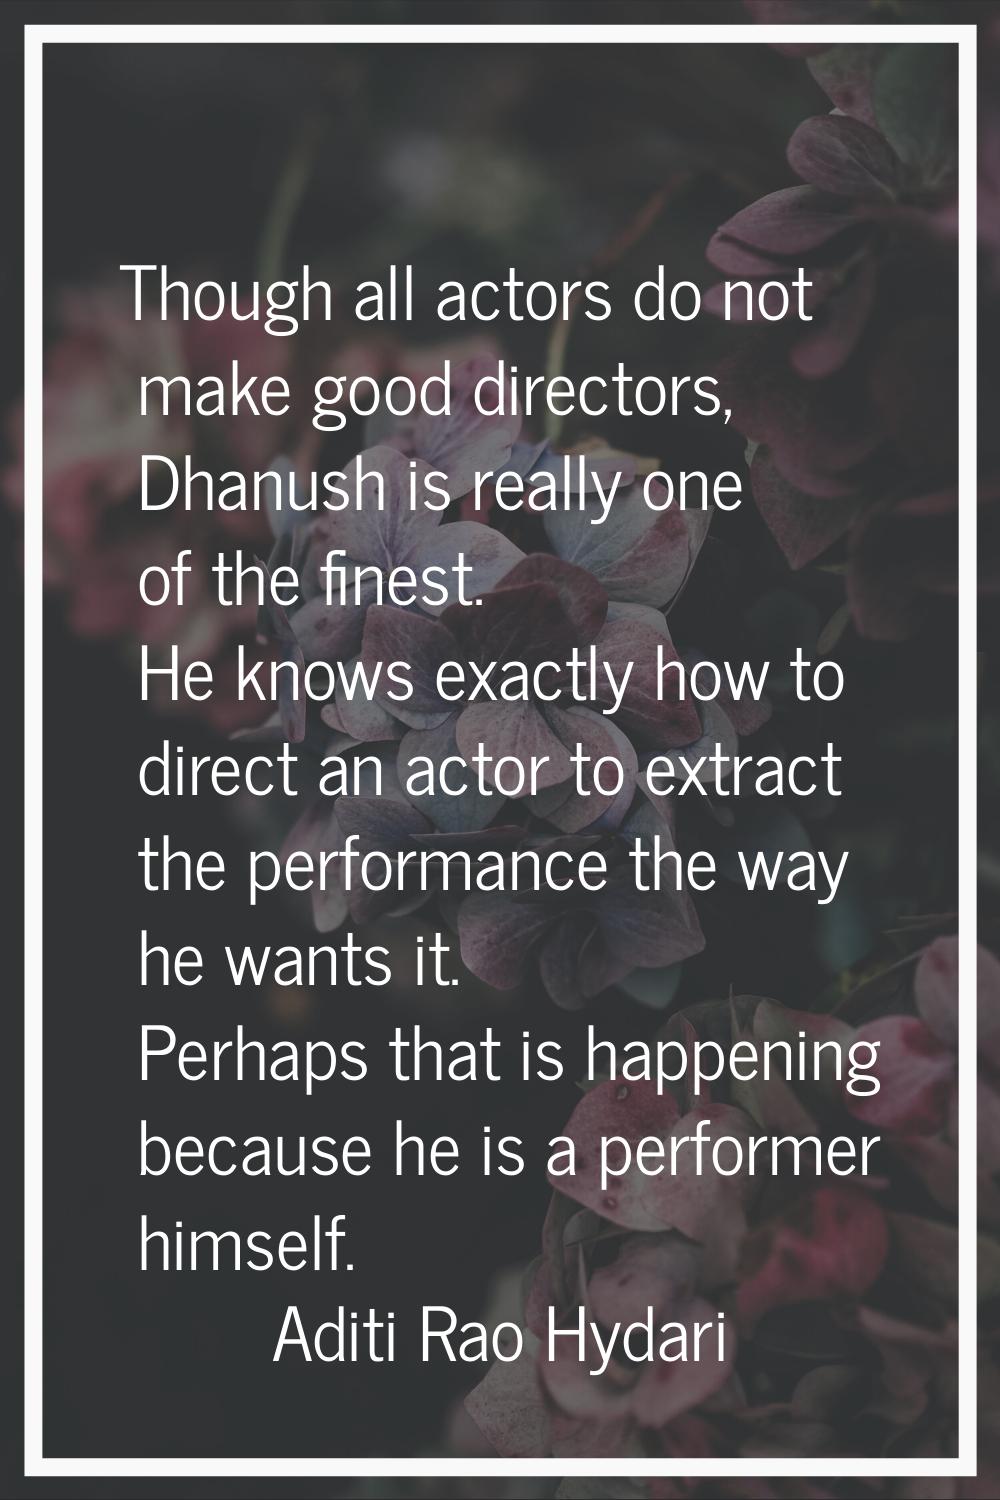 Though all actors do not make good directors, Dhanush is really one of the finest. He knows exactly